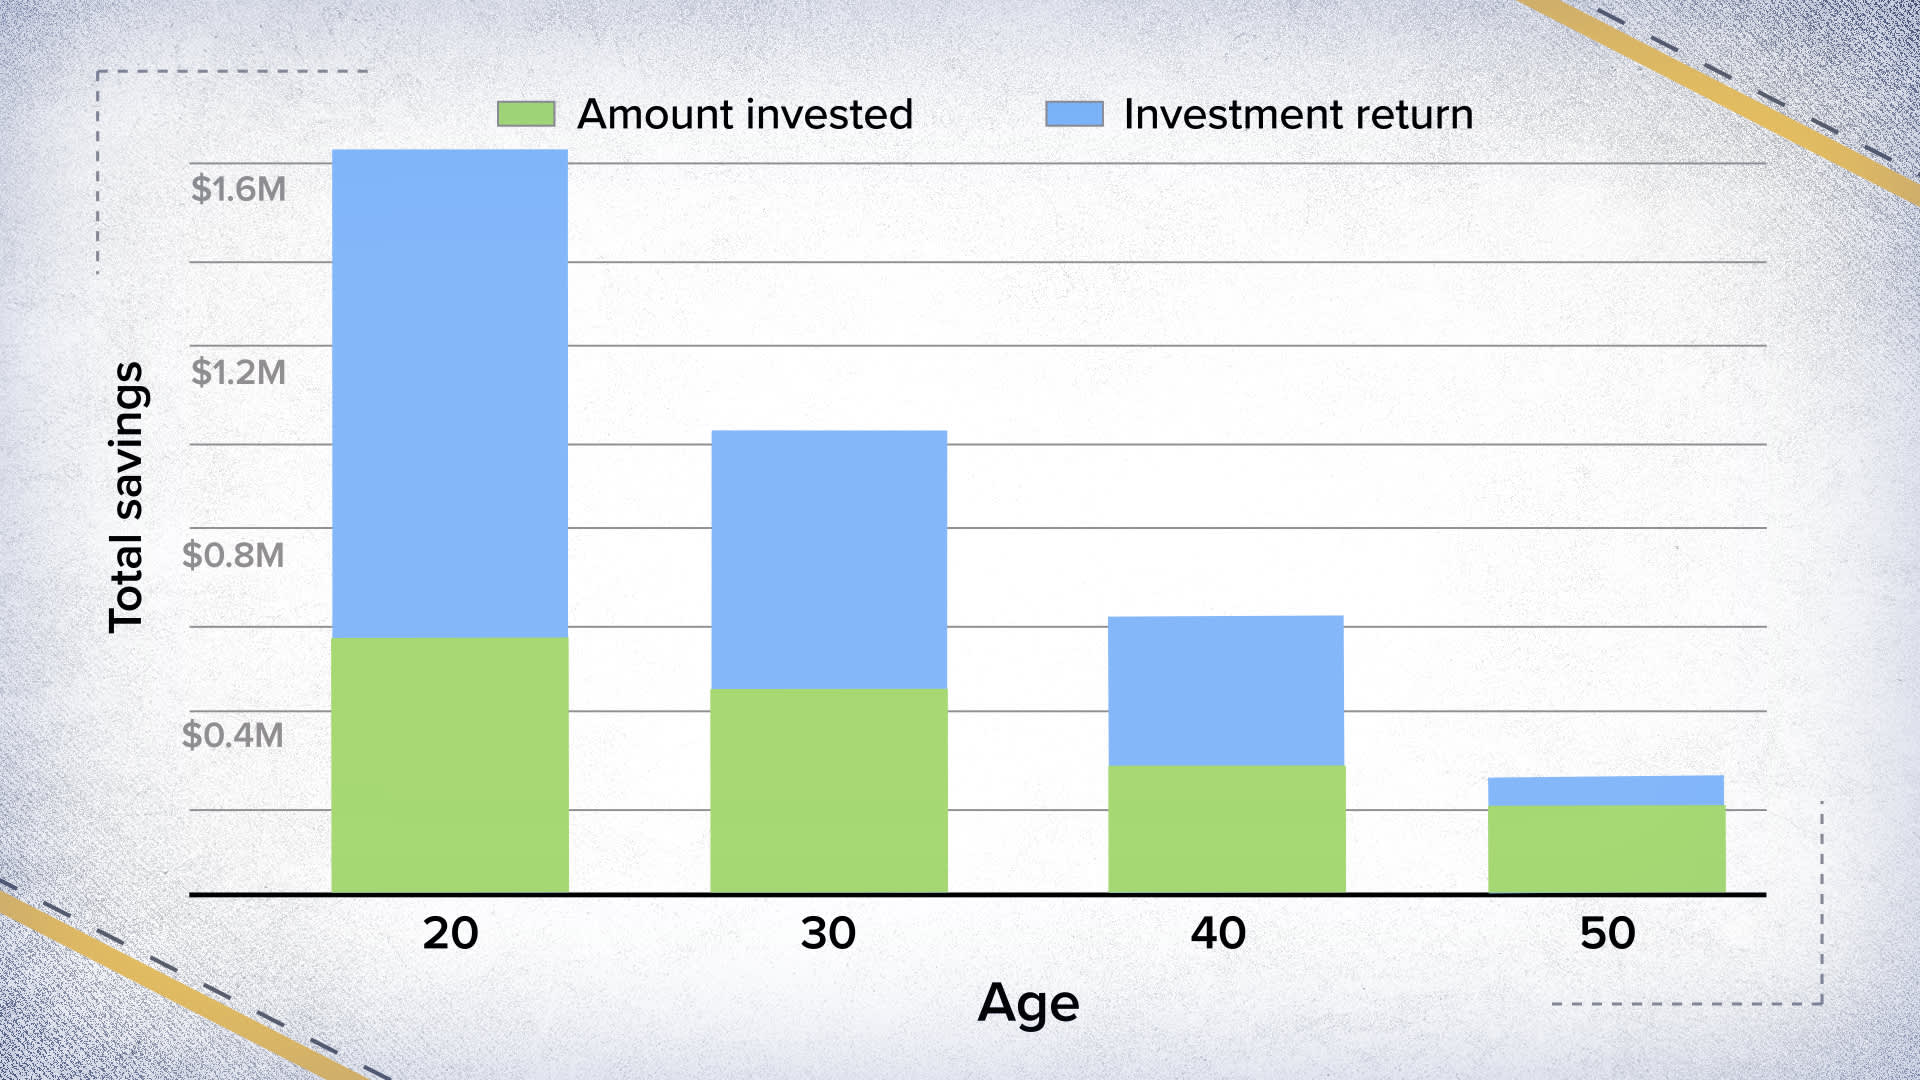 Why is it recommended that you begin to save early for retirement?